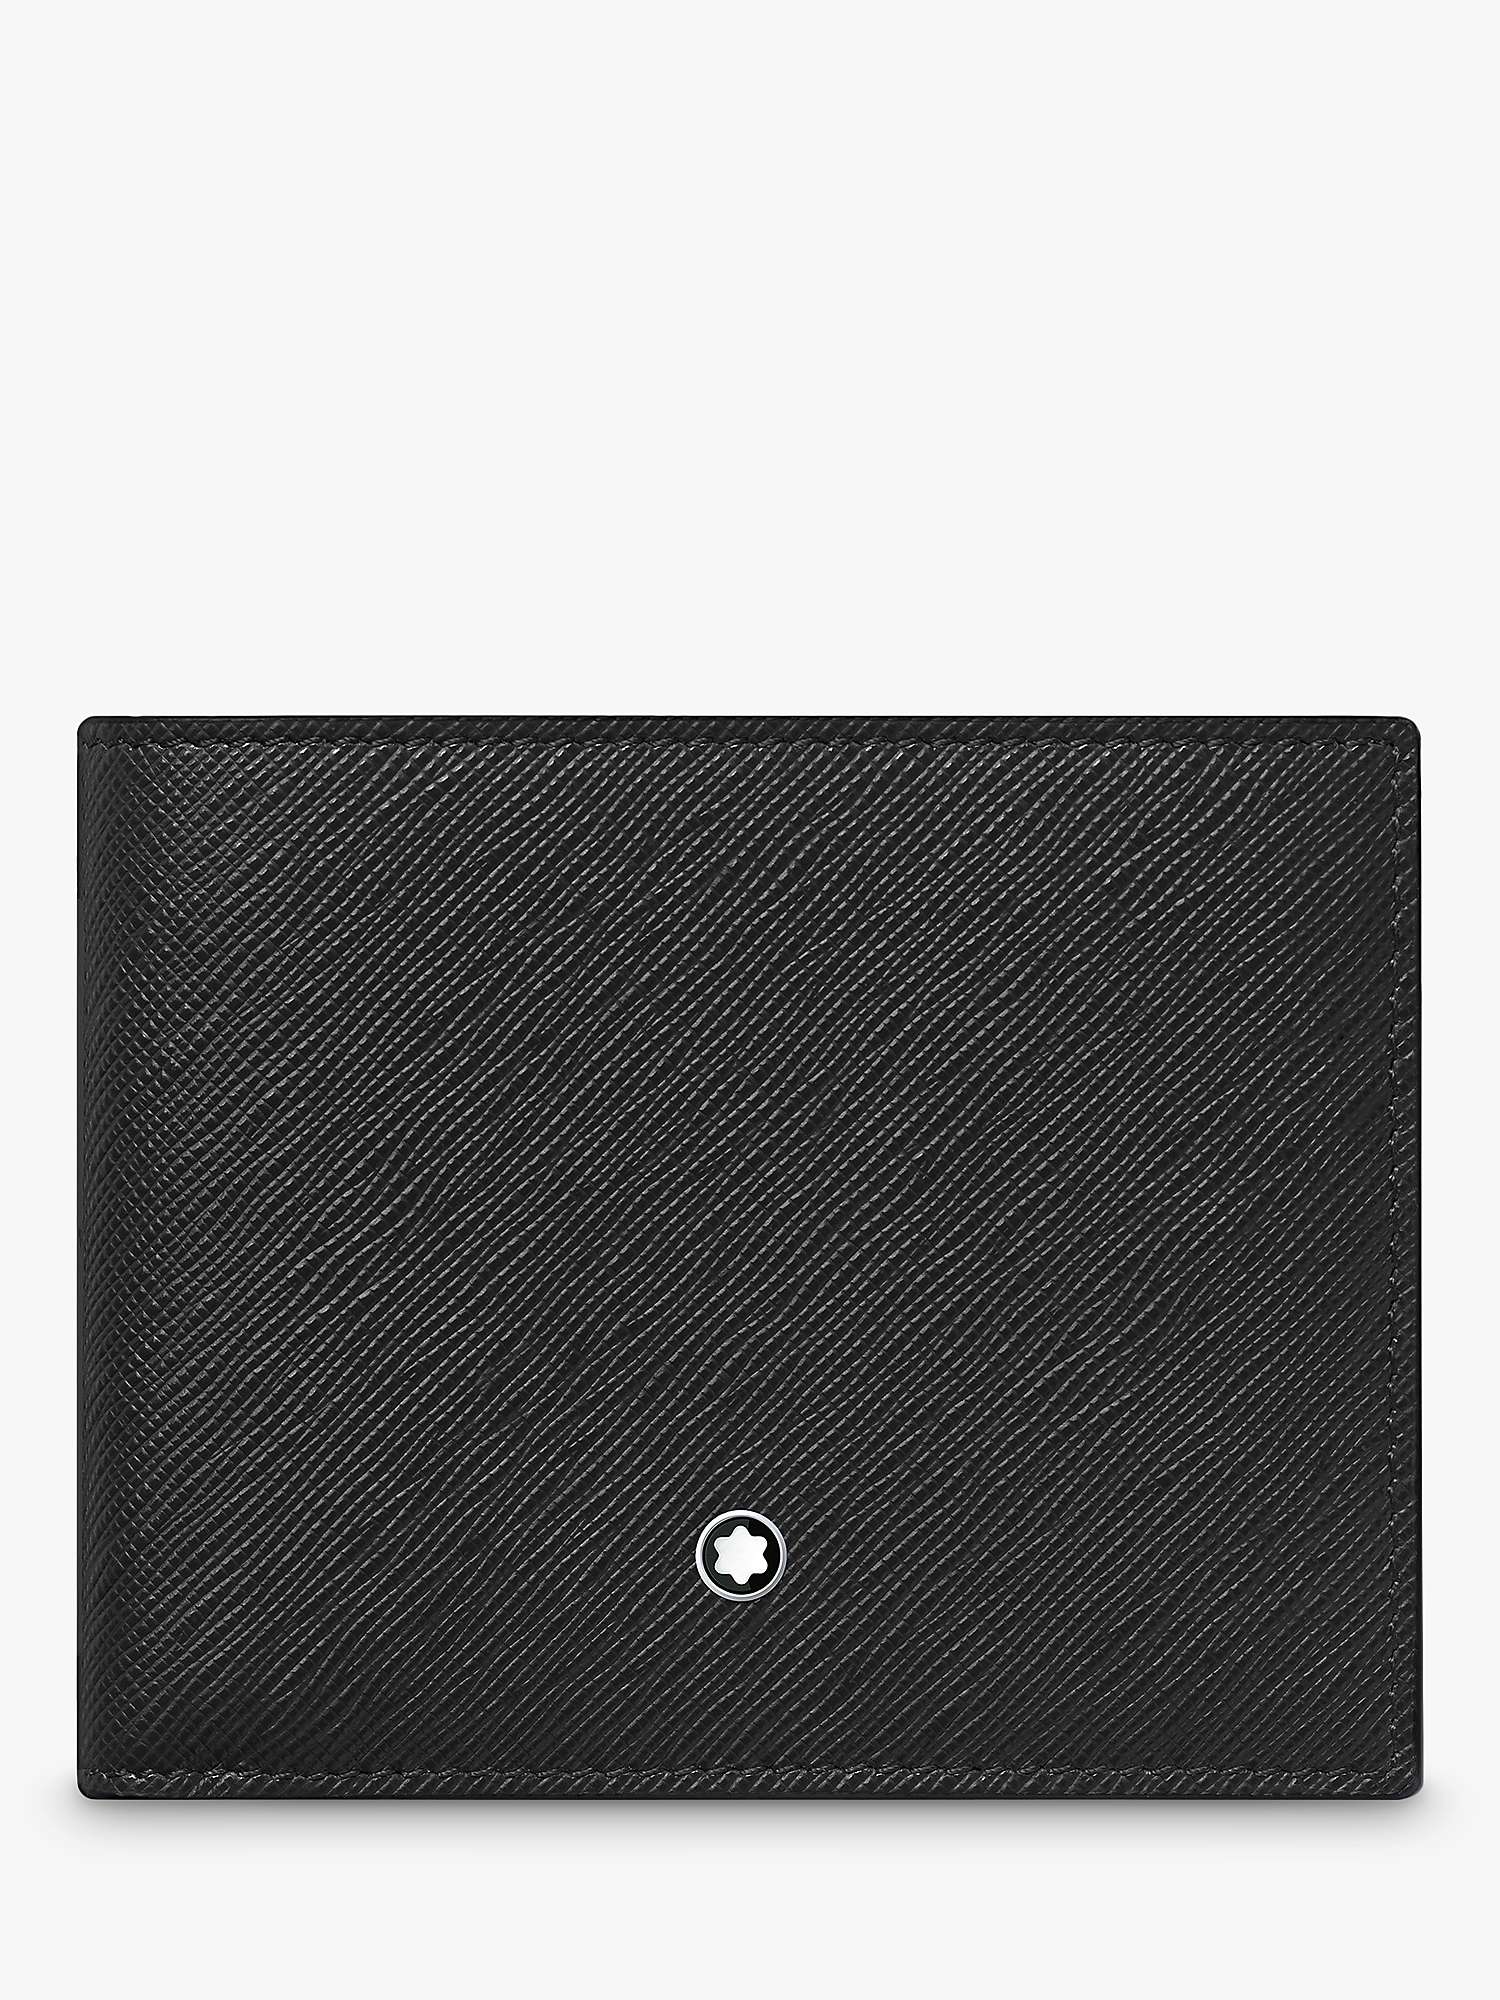 Buy Montblanc Sartorial 6 Card Leather Wallet Online at johnlewis.com